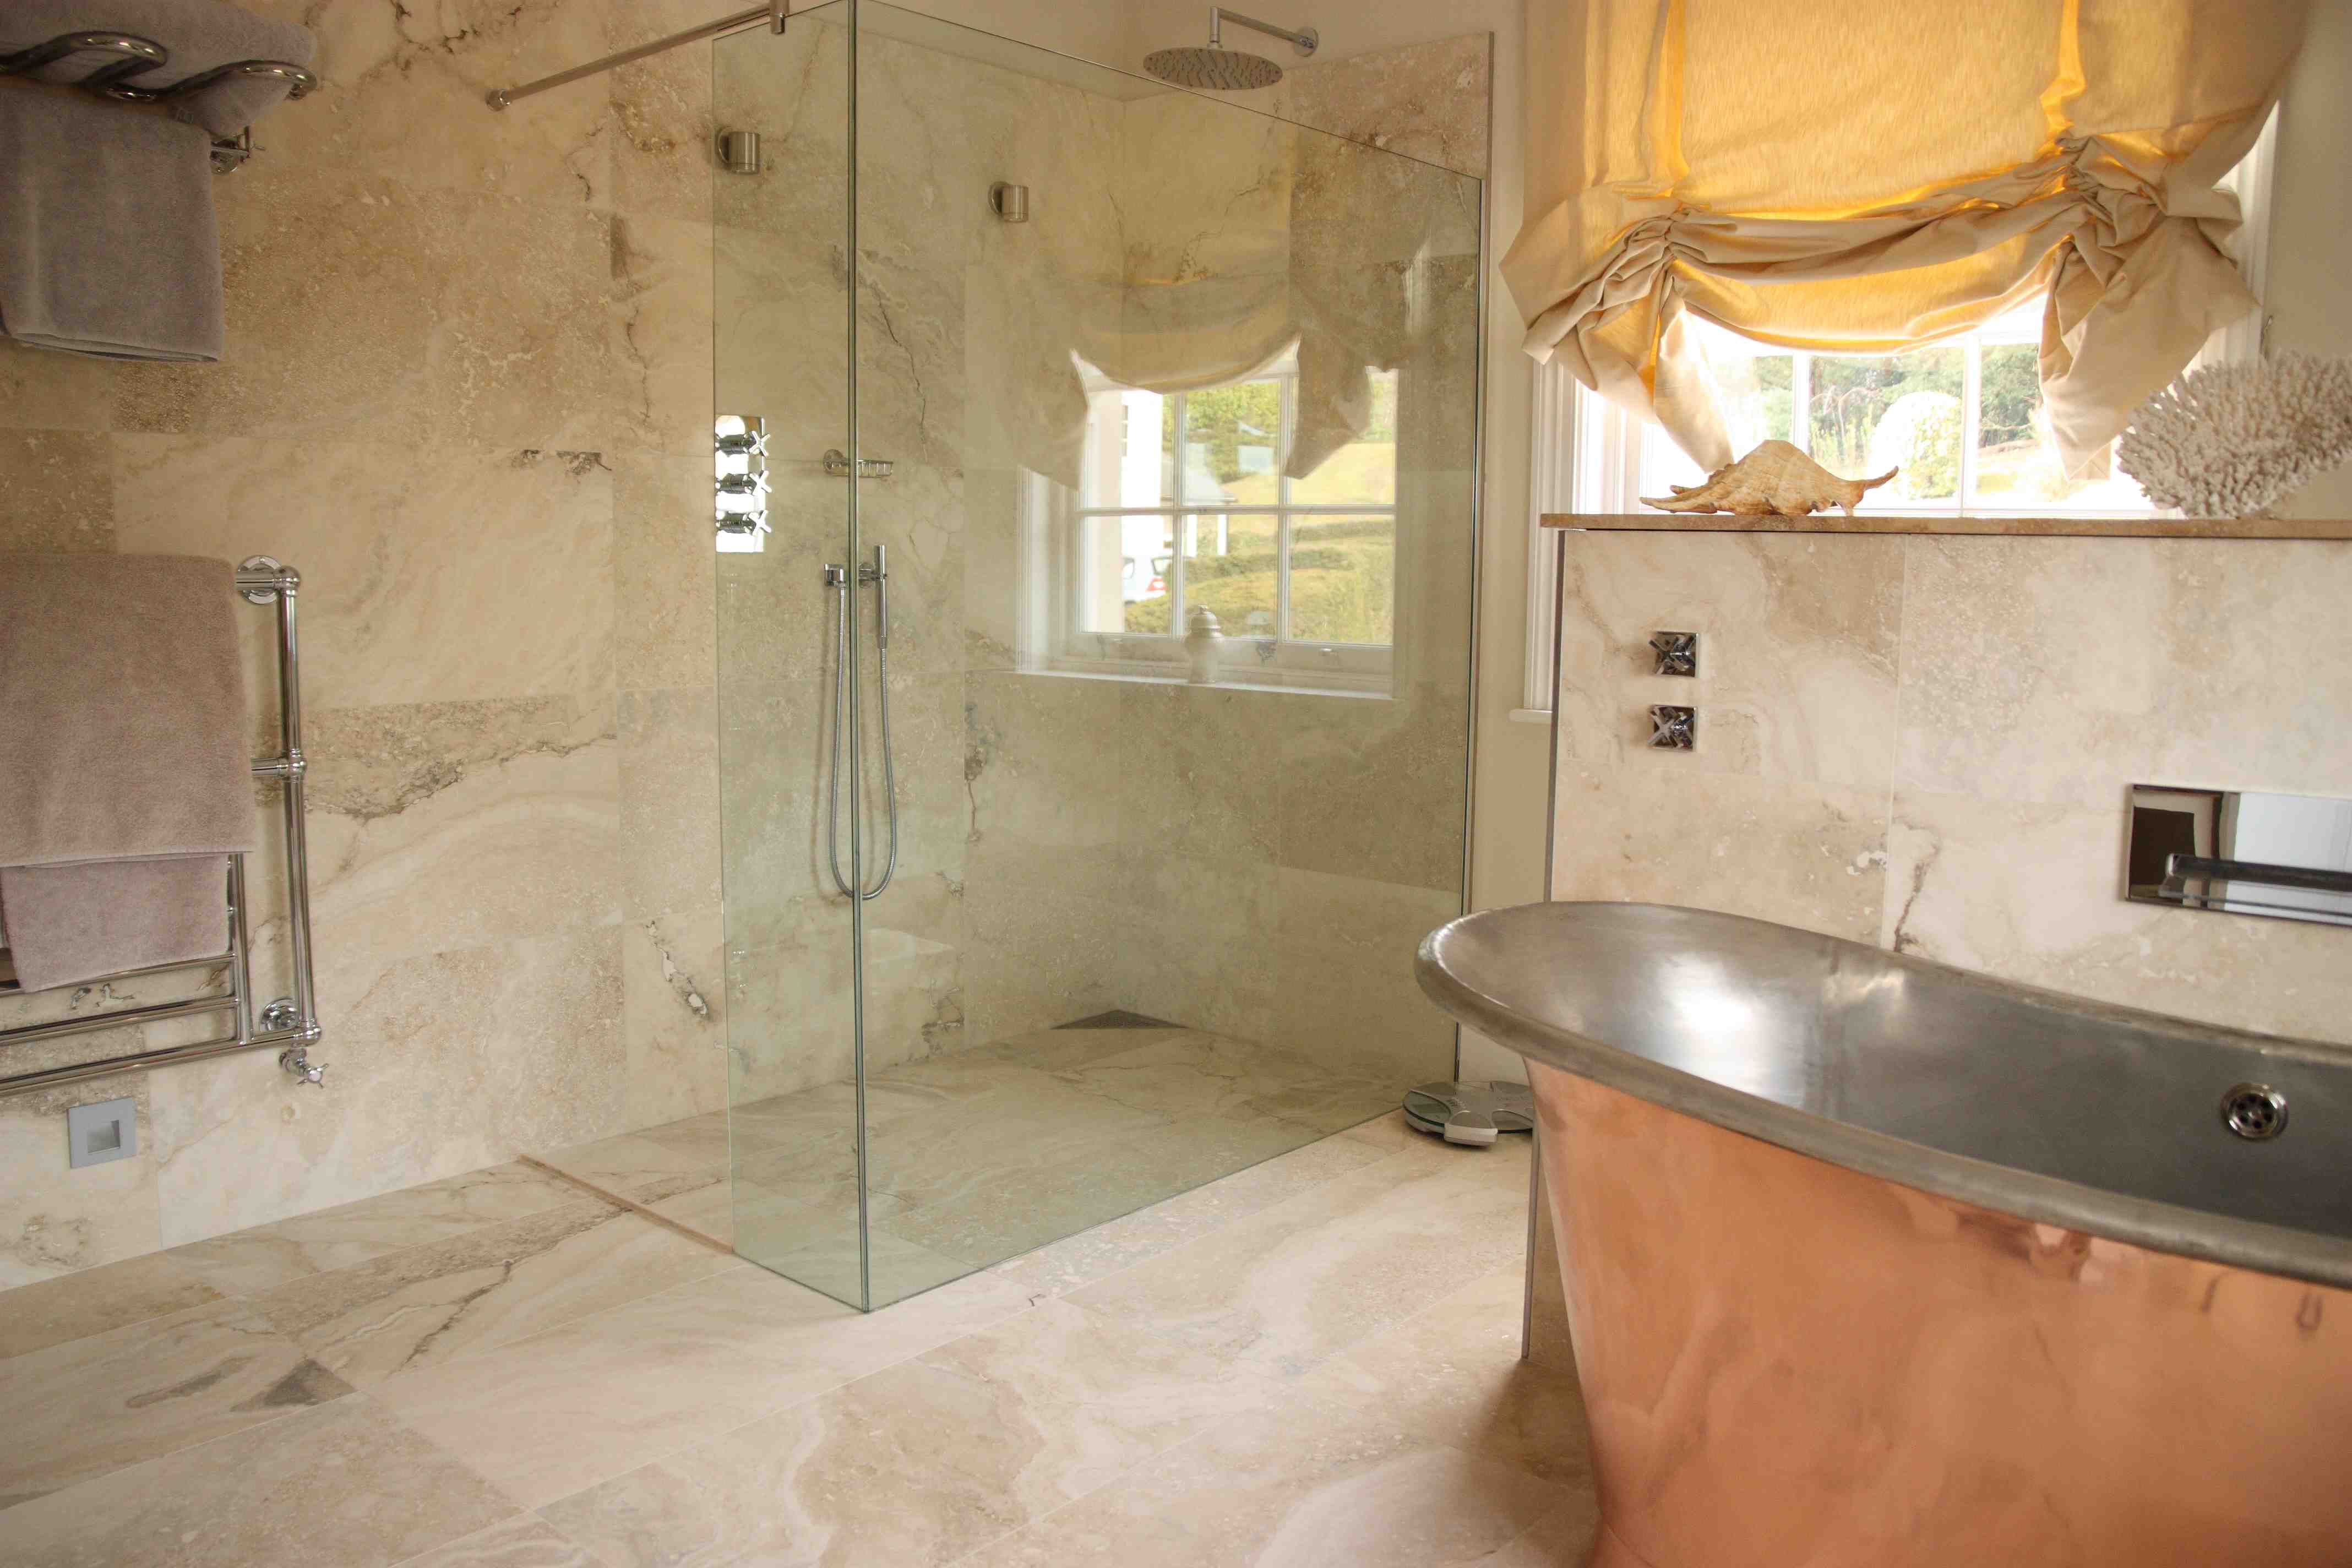 27 nice ideas and pictures of natural stone bathroom wall tiles